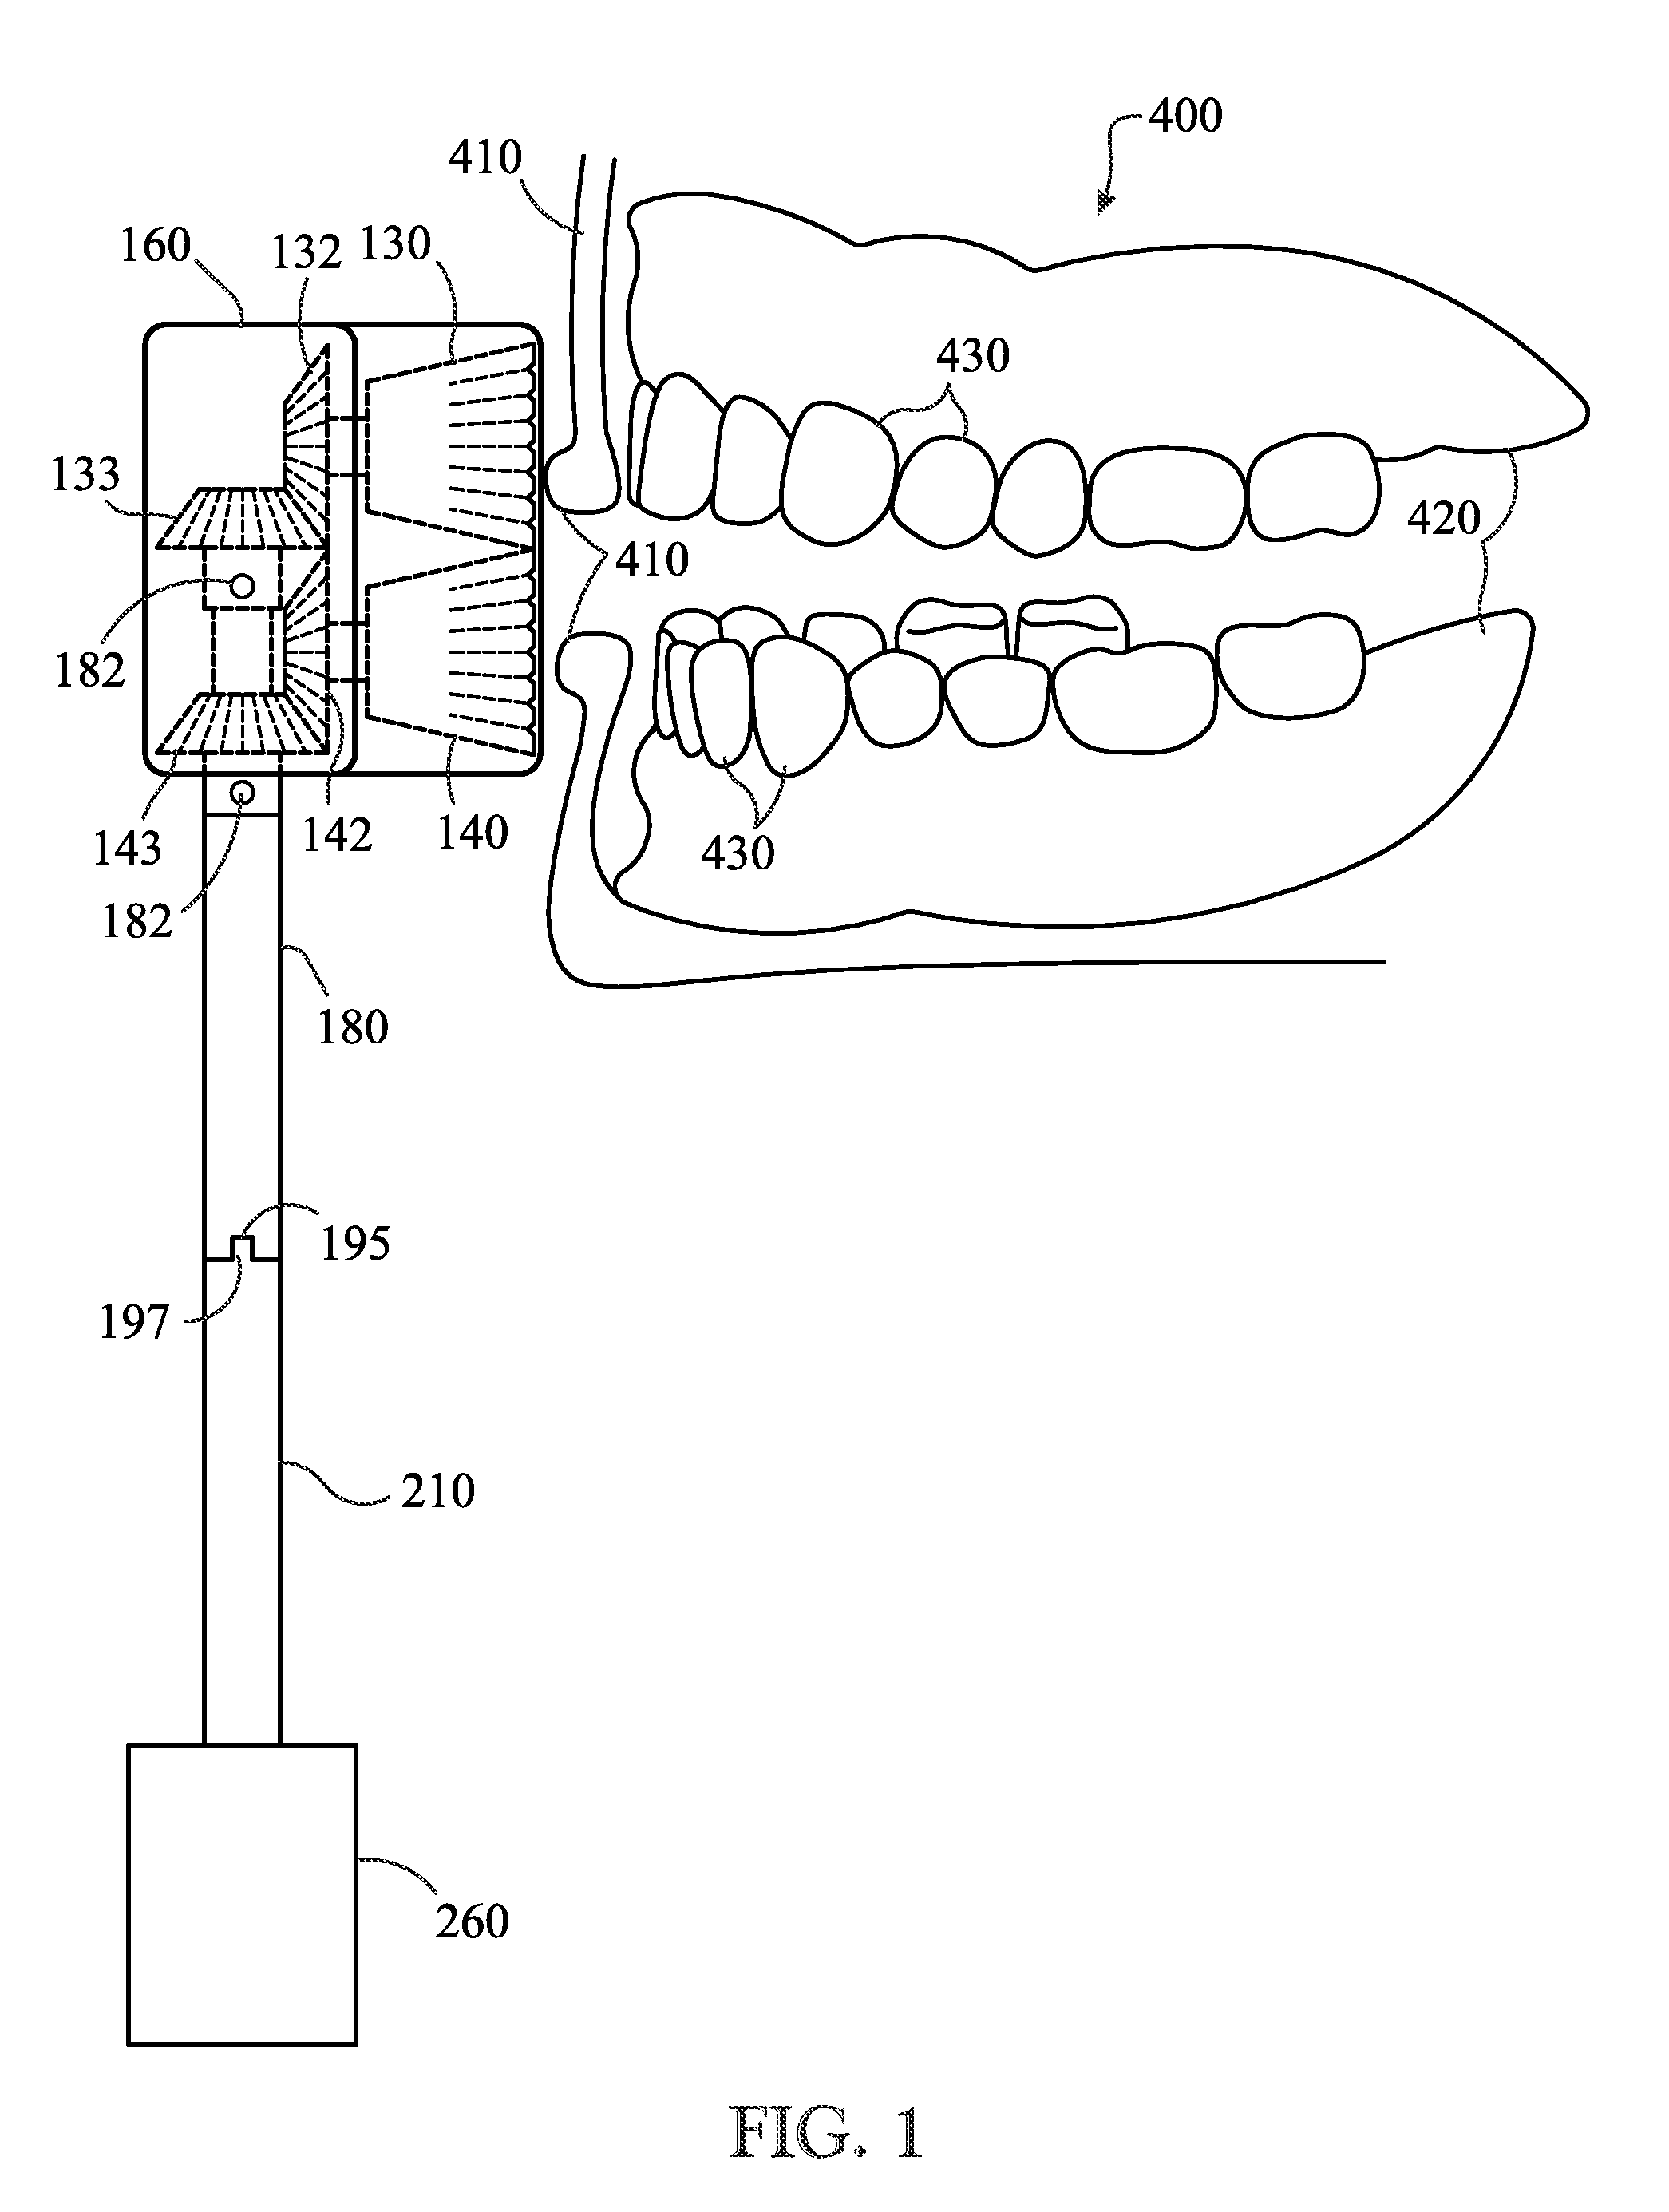 Splatter controlling tooth polishing system